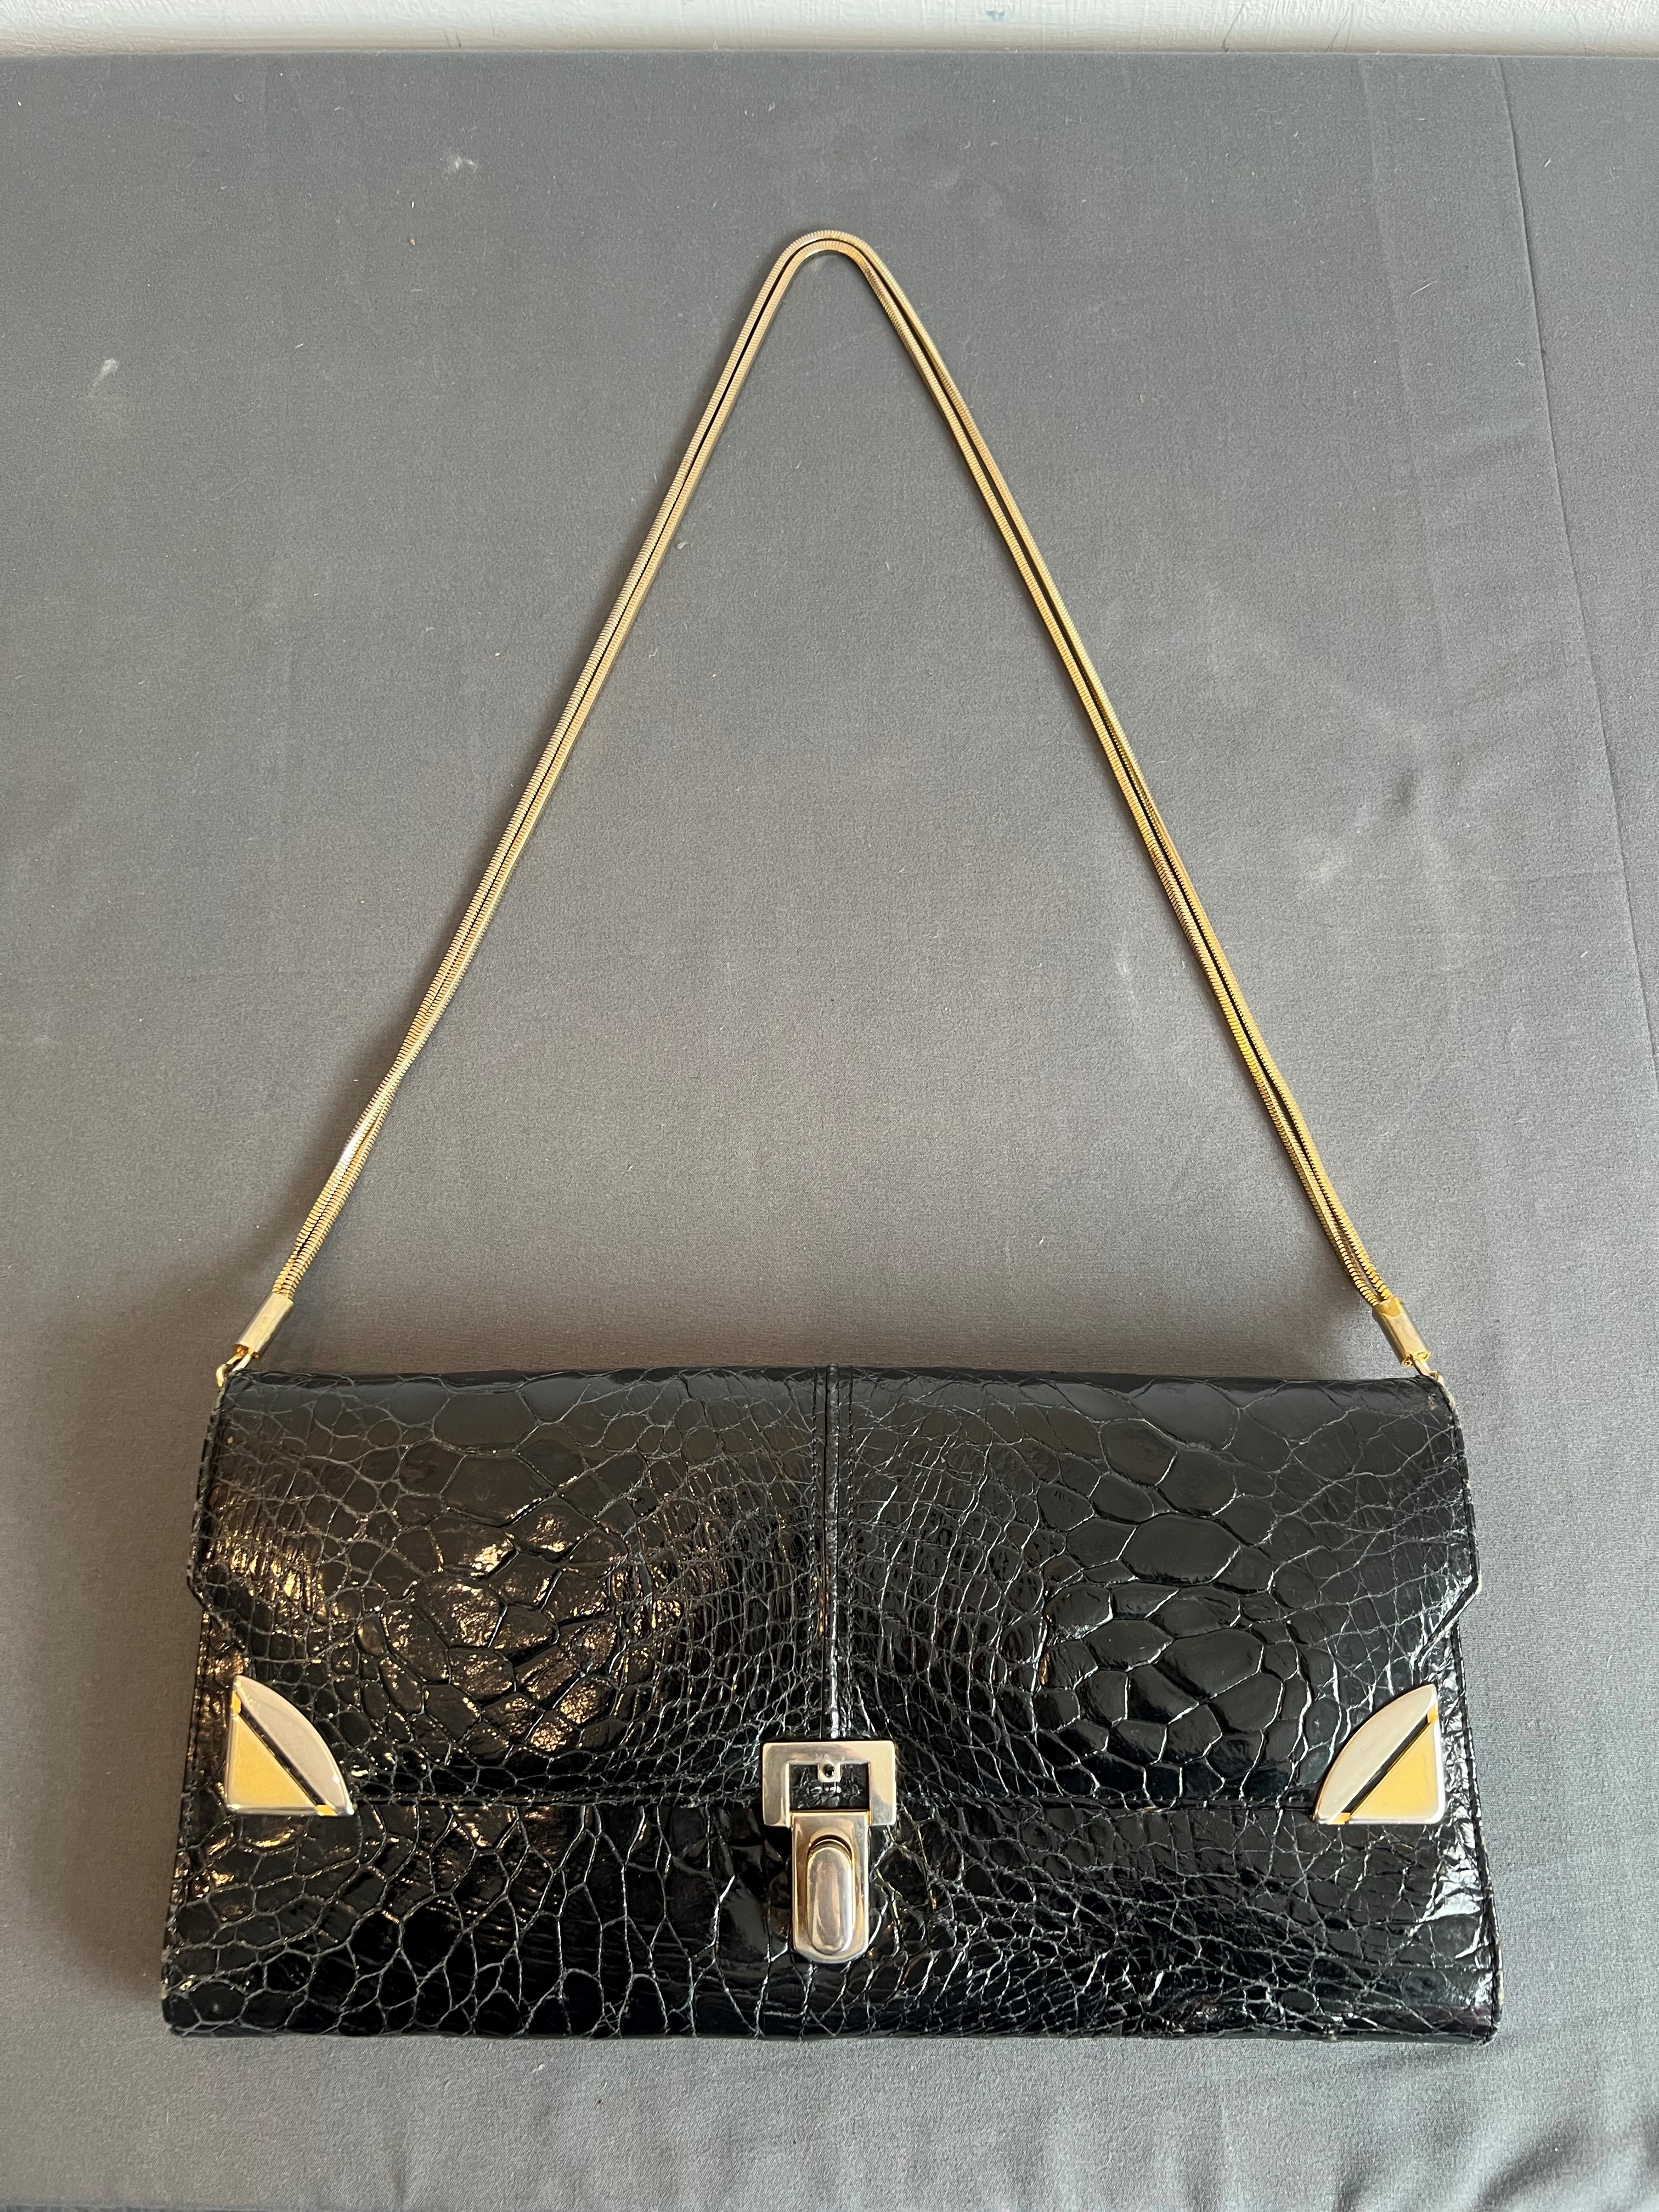 Three ladies shoulder bags - late 20th / early 21st century, comprising a Marc B envelope-style